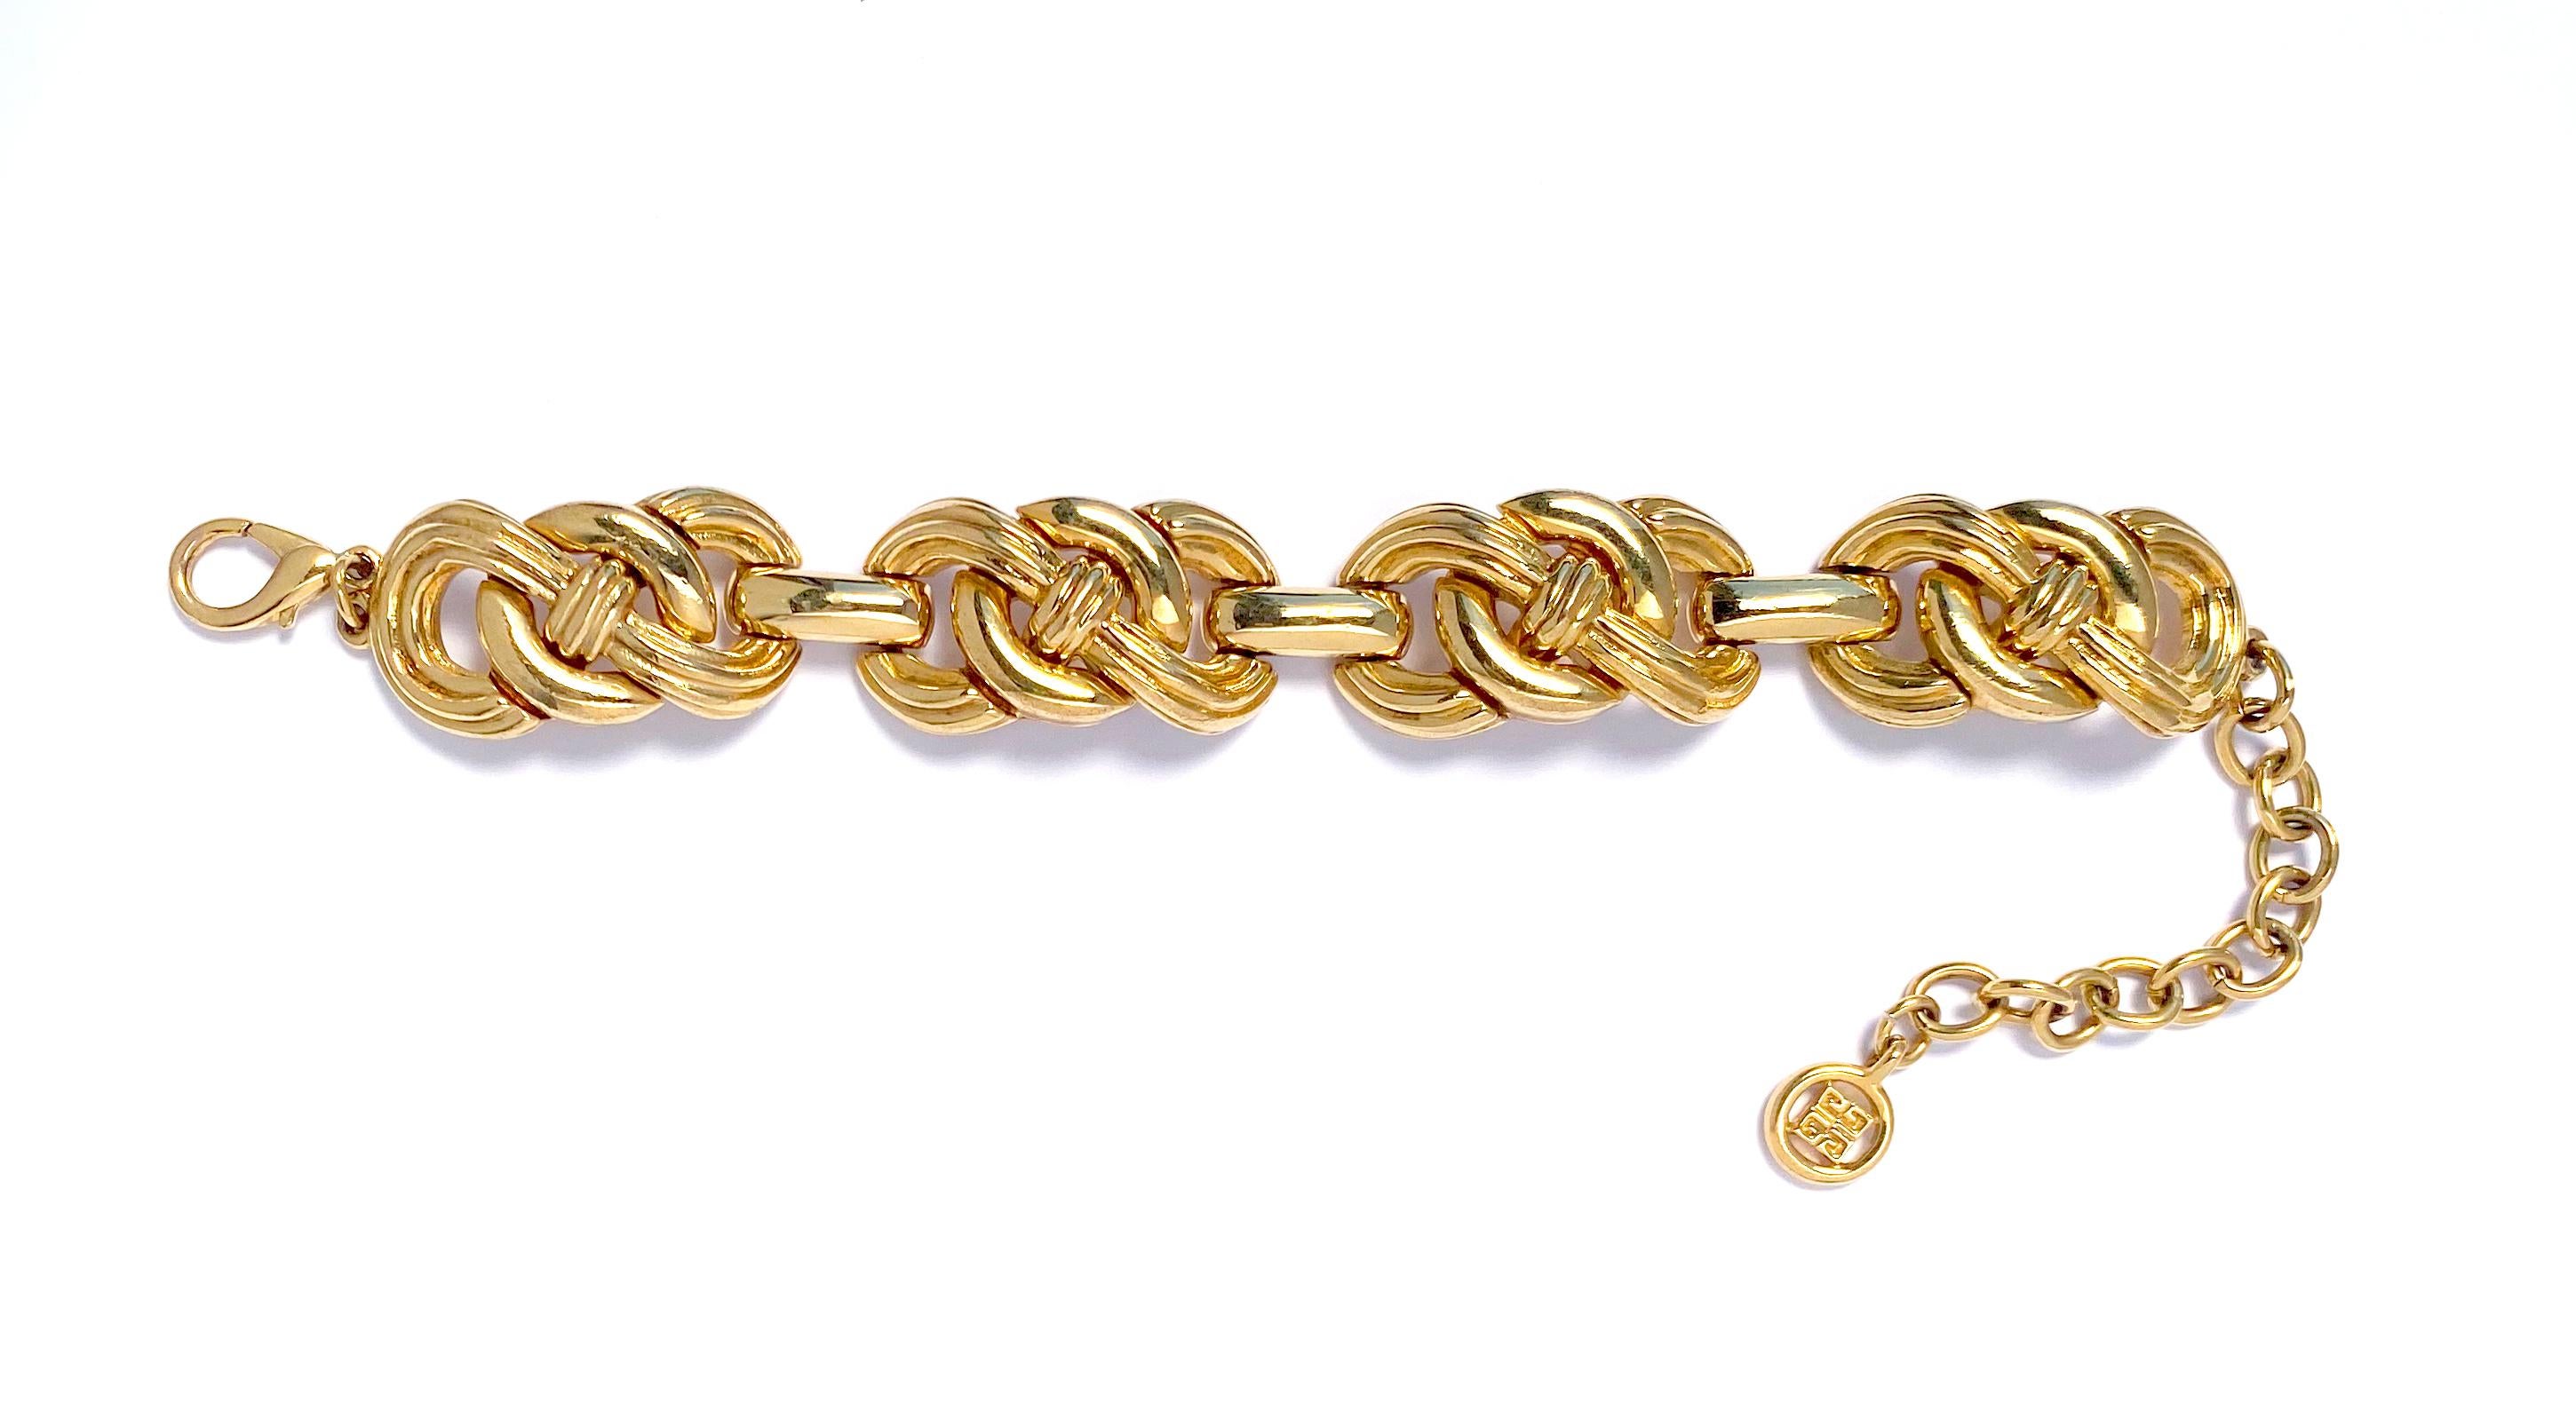 1980s Vintage Givenchy chain bracelet featuring big ornate links in gold plate.  This vintage bracelet features polished links with in an open knot design with a lobster clasp and extension chain finished with the Givenchy logo.   Bracelet measures